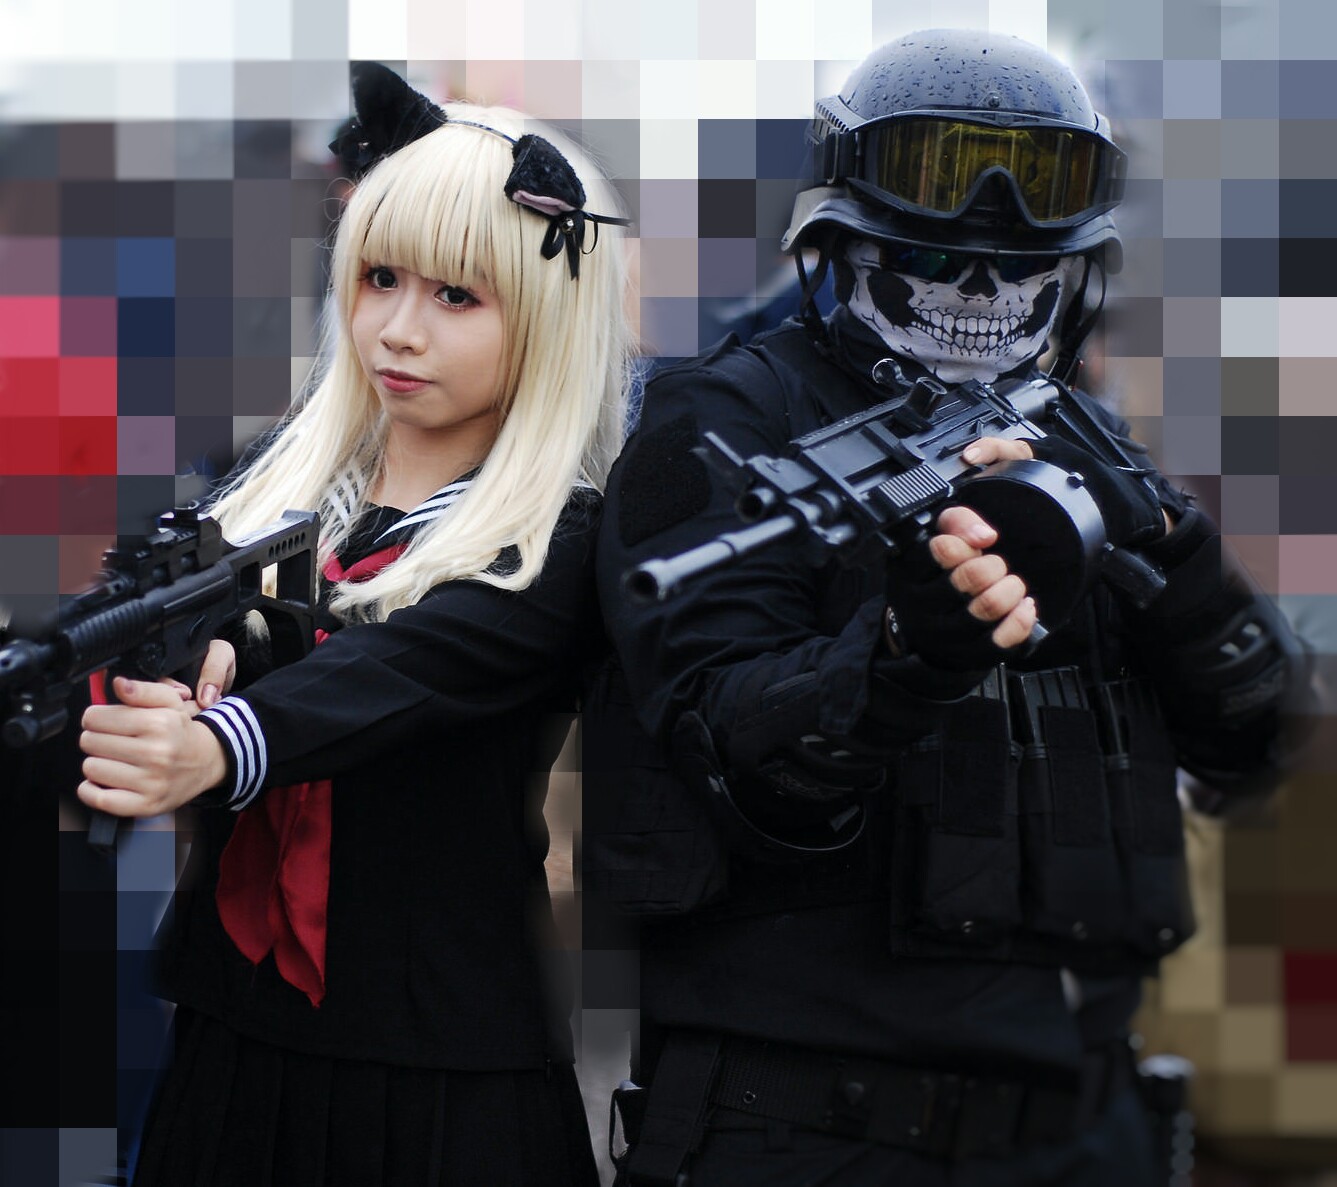 https://img-cdn.2game.vn/pictures/images/2015/7/23/cosplay_dot_kich_6.jpg